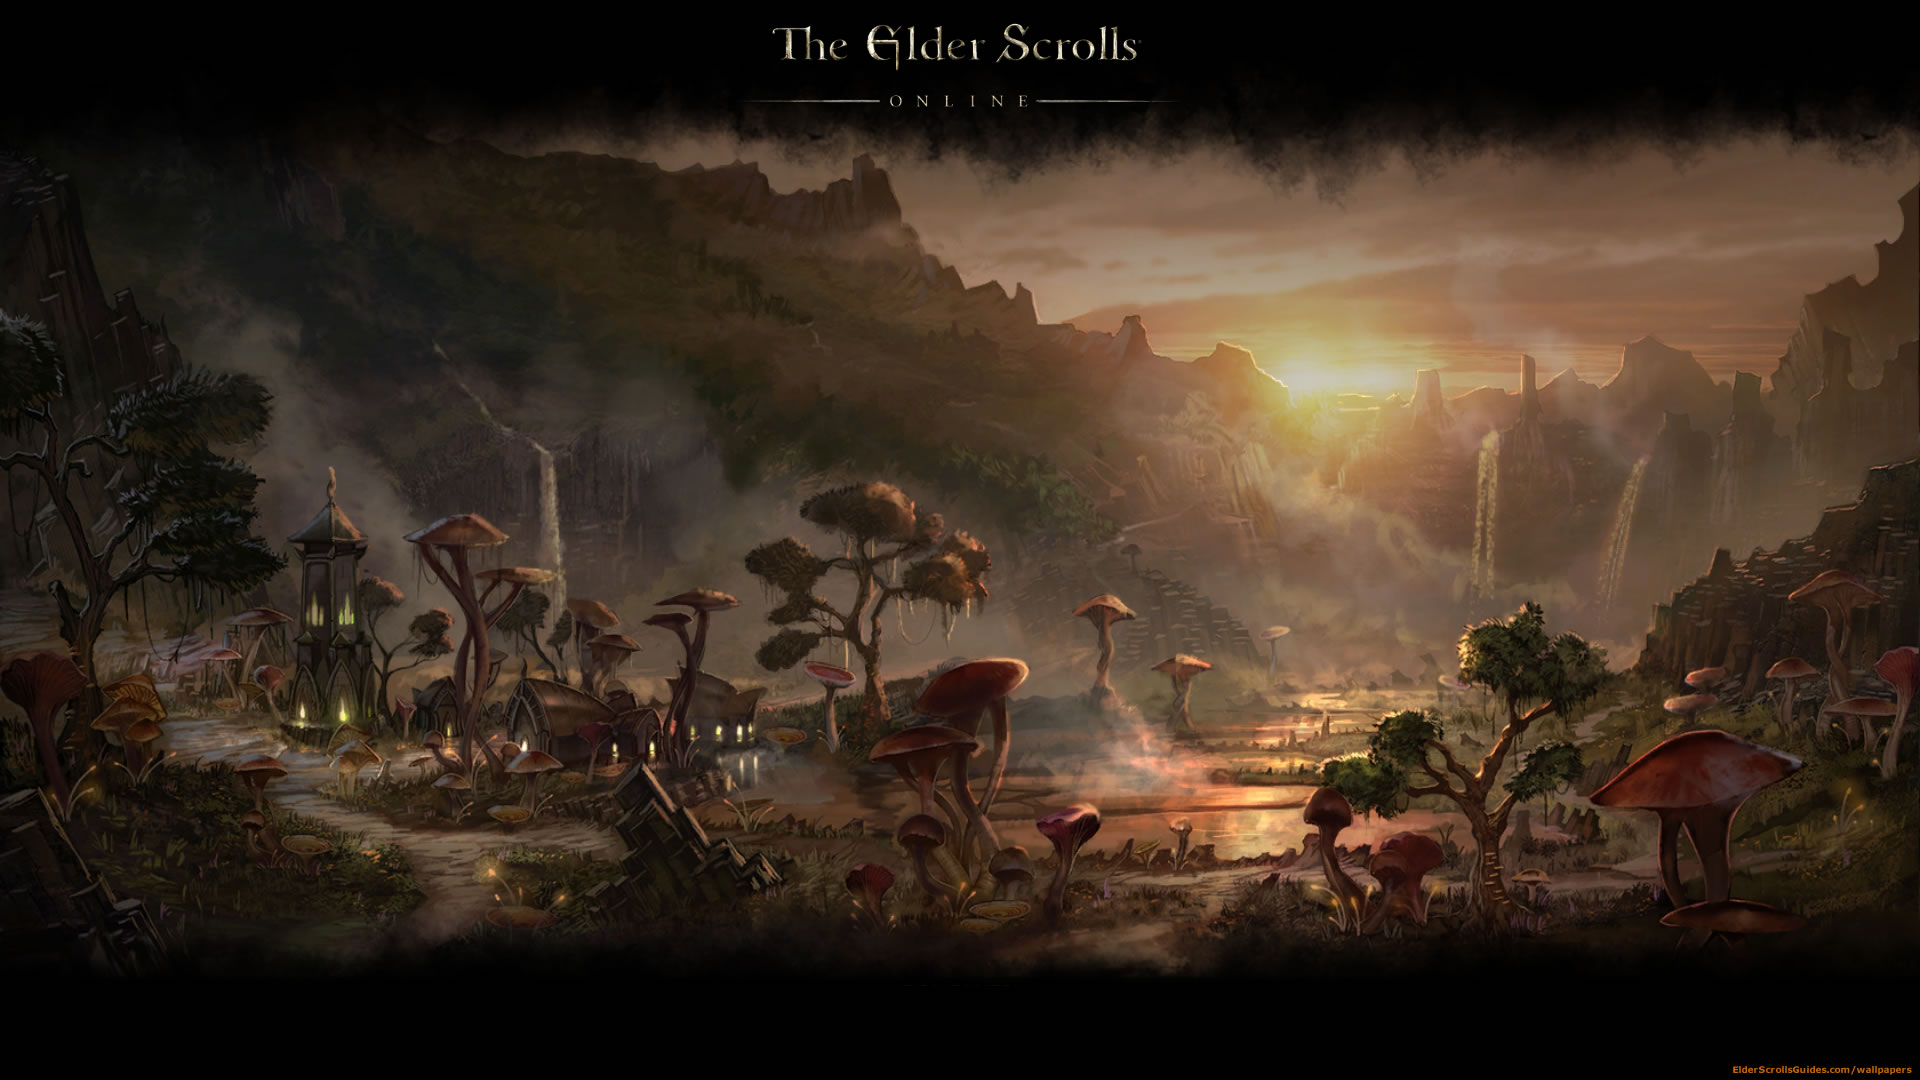 teso wallpaper,strategy video game,action adventure game,pc game,sky,cg artwork